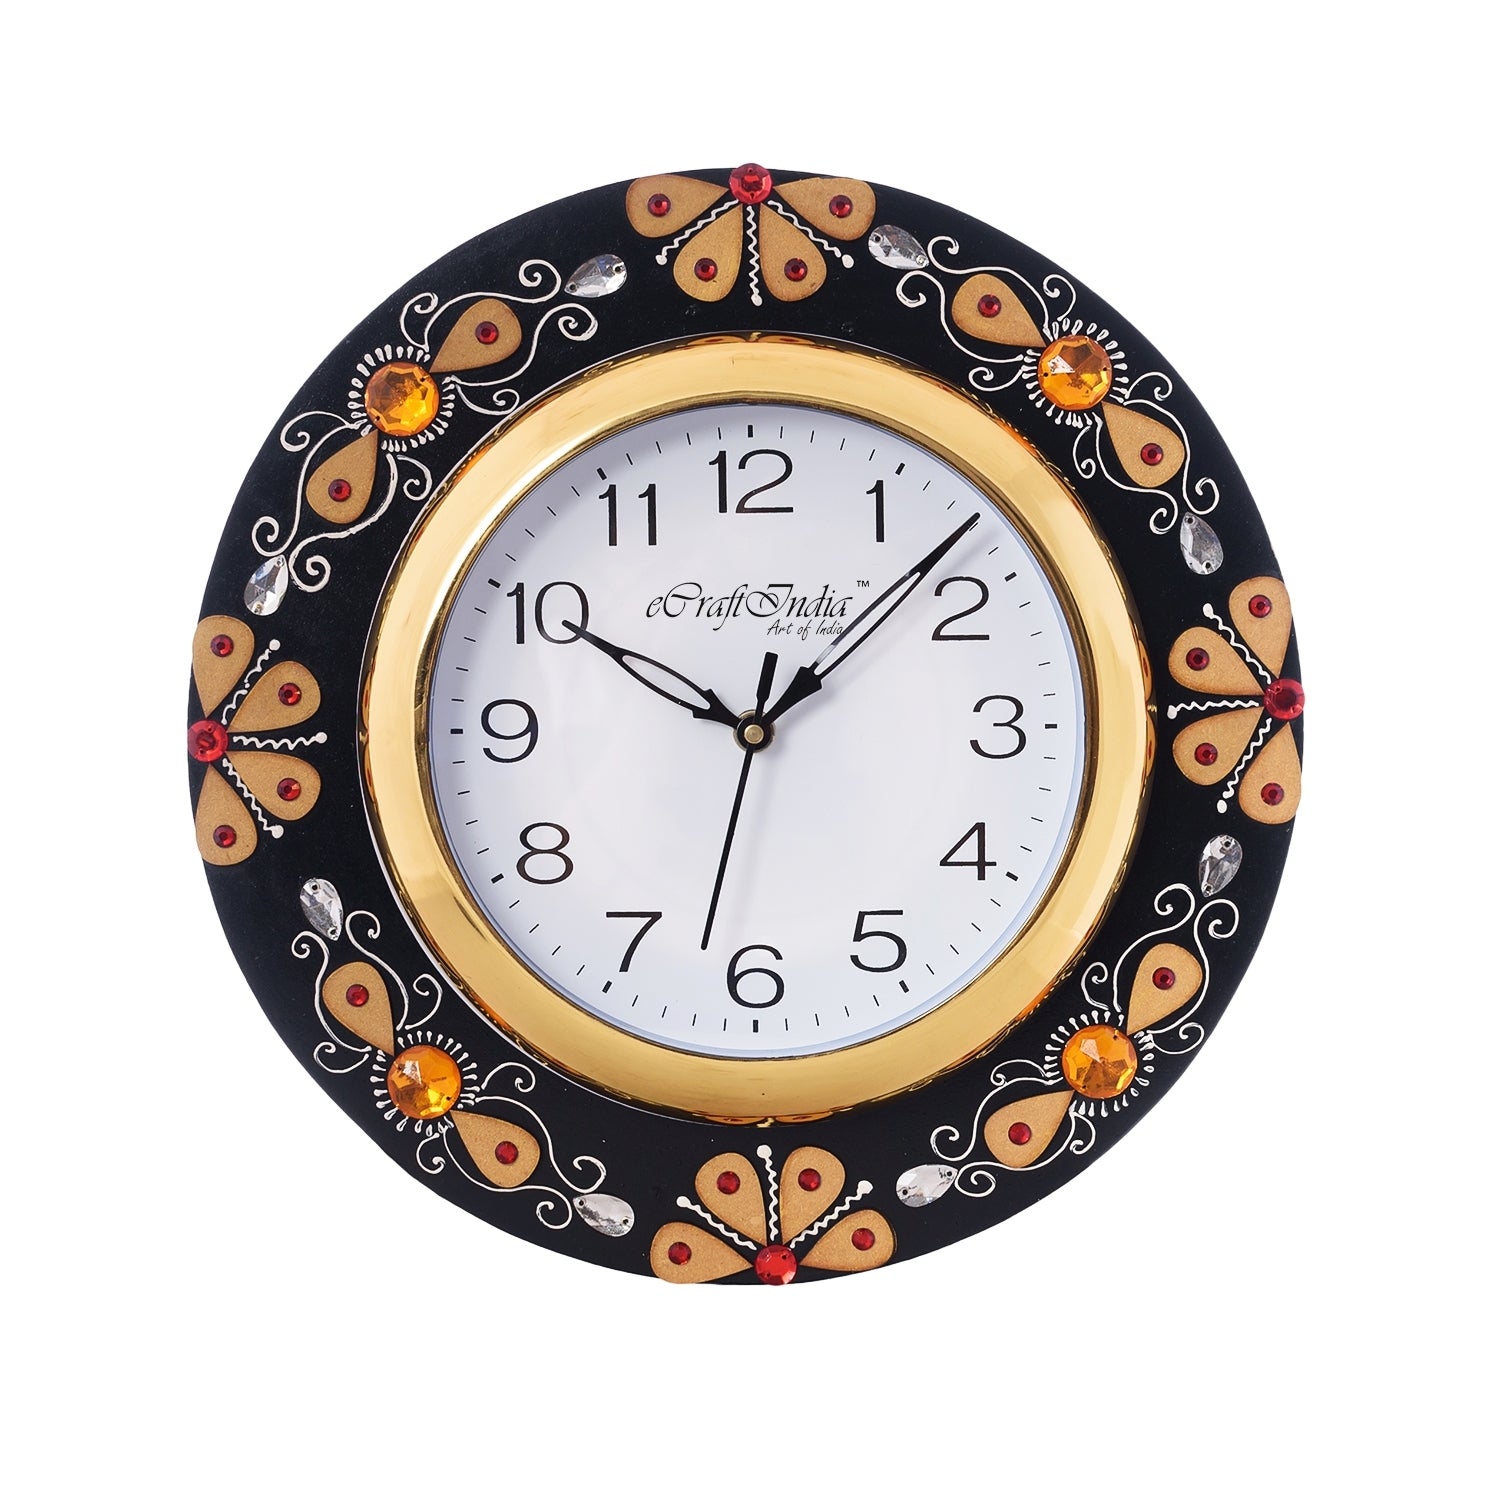 Yellow Crystal Studded Decorative Papier-Mache Wooden Handcrafted Wall Clock